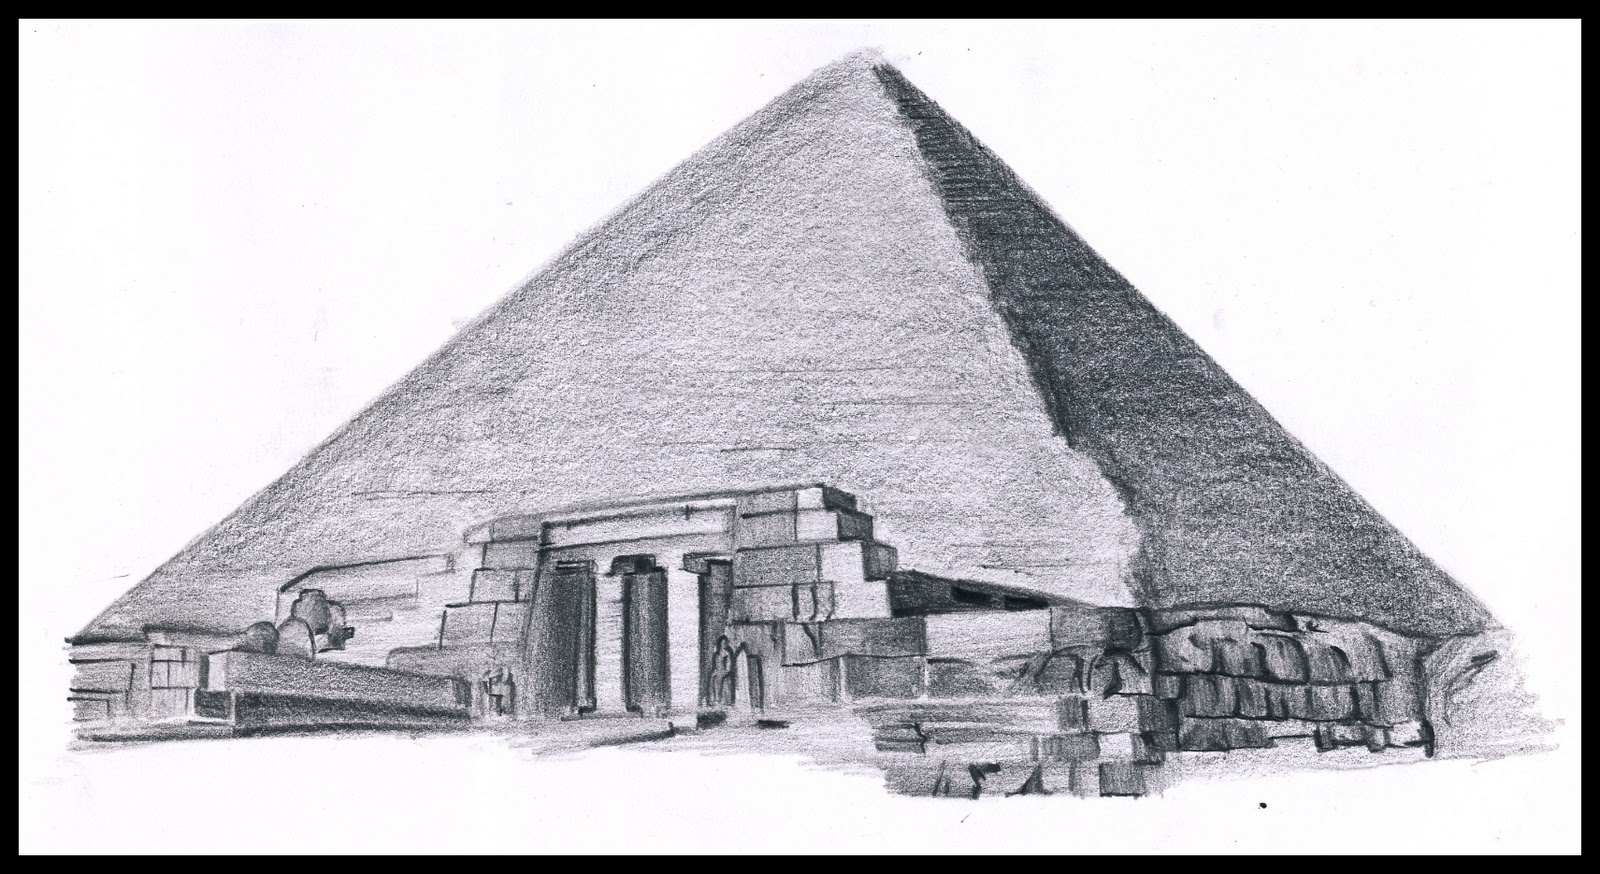 Egyptian Architecture Ancient Egypt Architecture Drawing fanficisatkm53